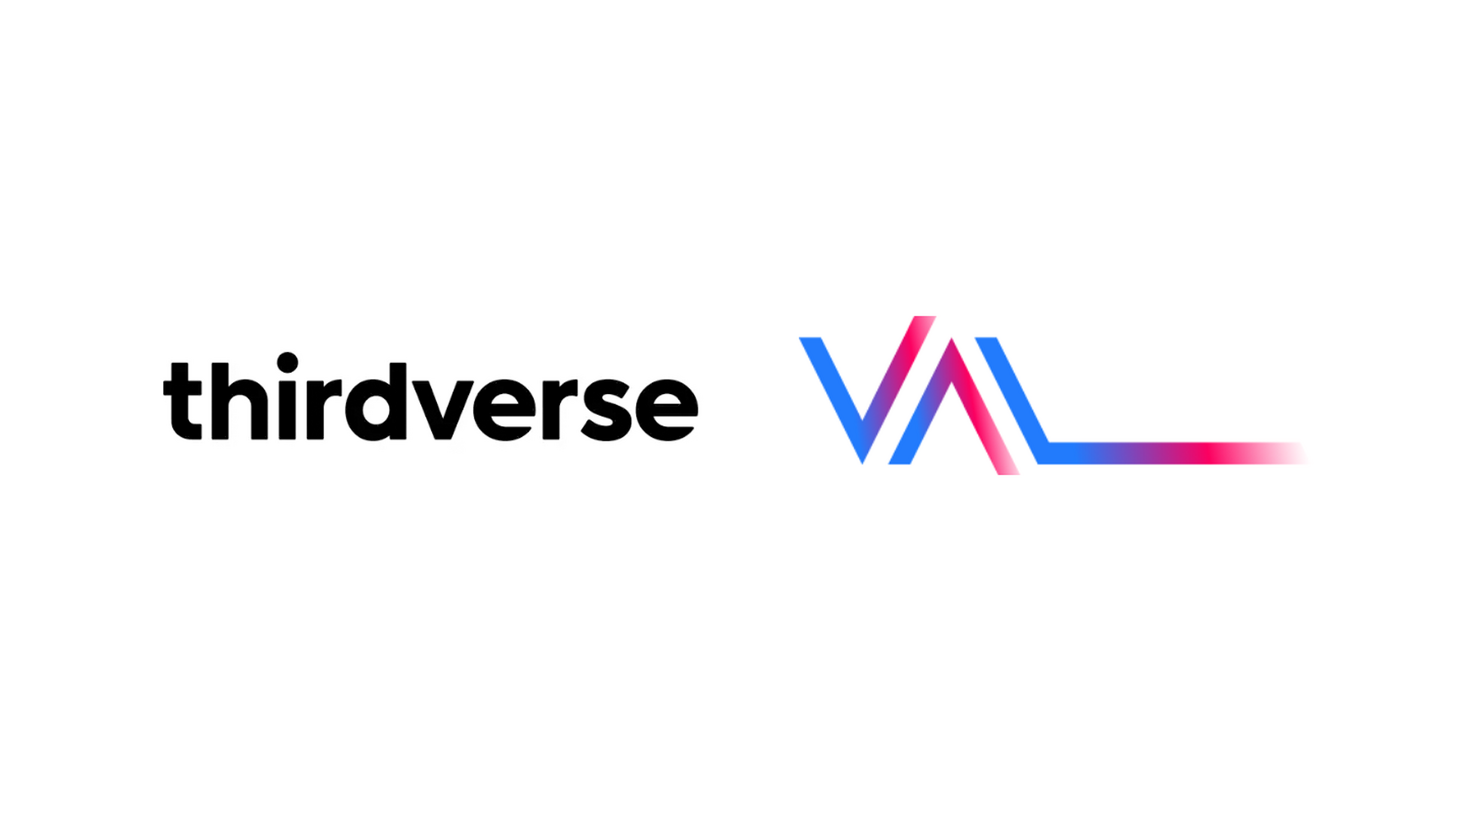 Virtual reality developer Thirdverse partners with the Virtual Athletics League to create the X8 e-sports league.  ｜ Press release from Thirdverse Inc.